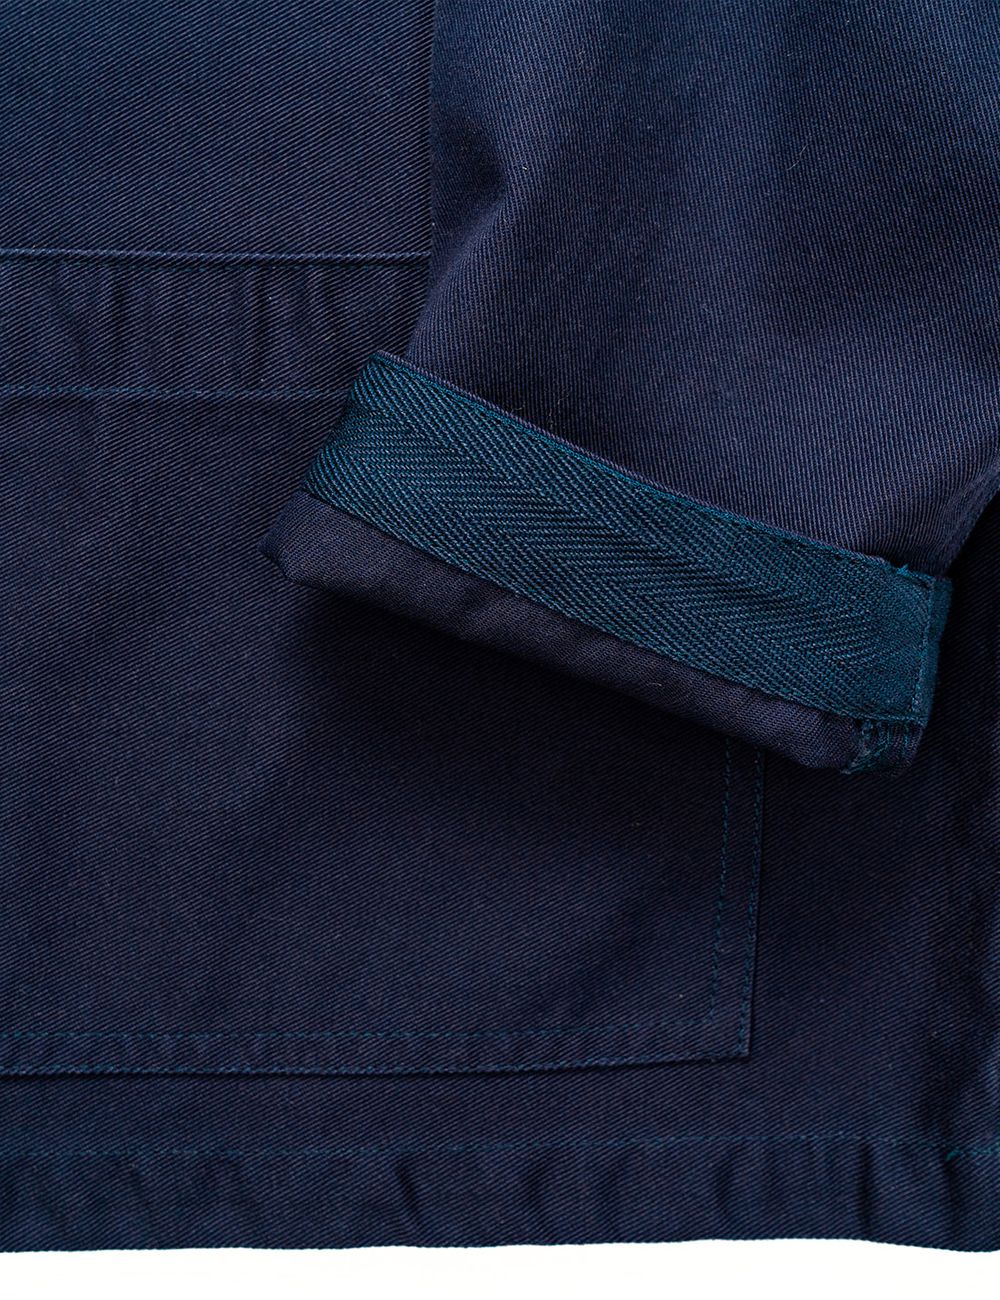 YARMOUTH OILSKINS THE CLASSIC SMOCK NAVY - UNIFORM RESEARCH